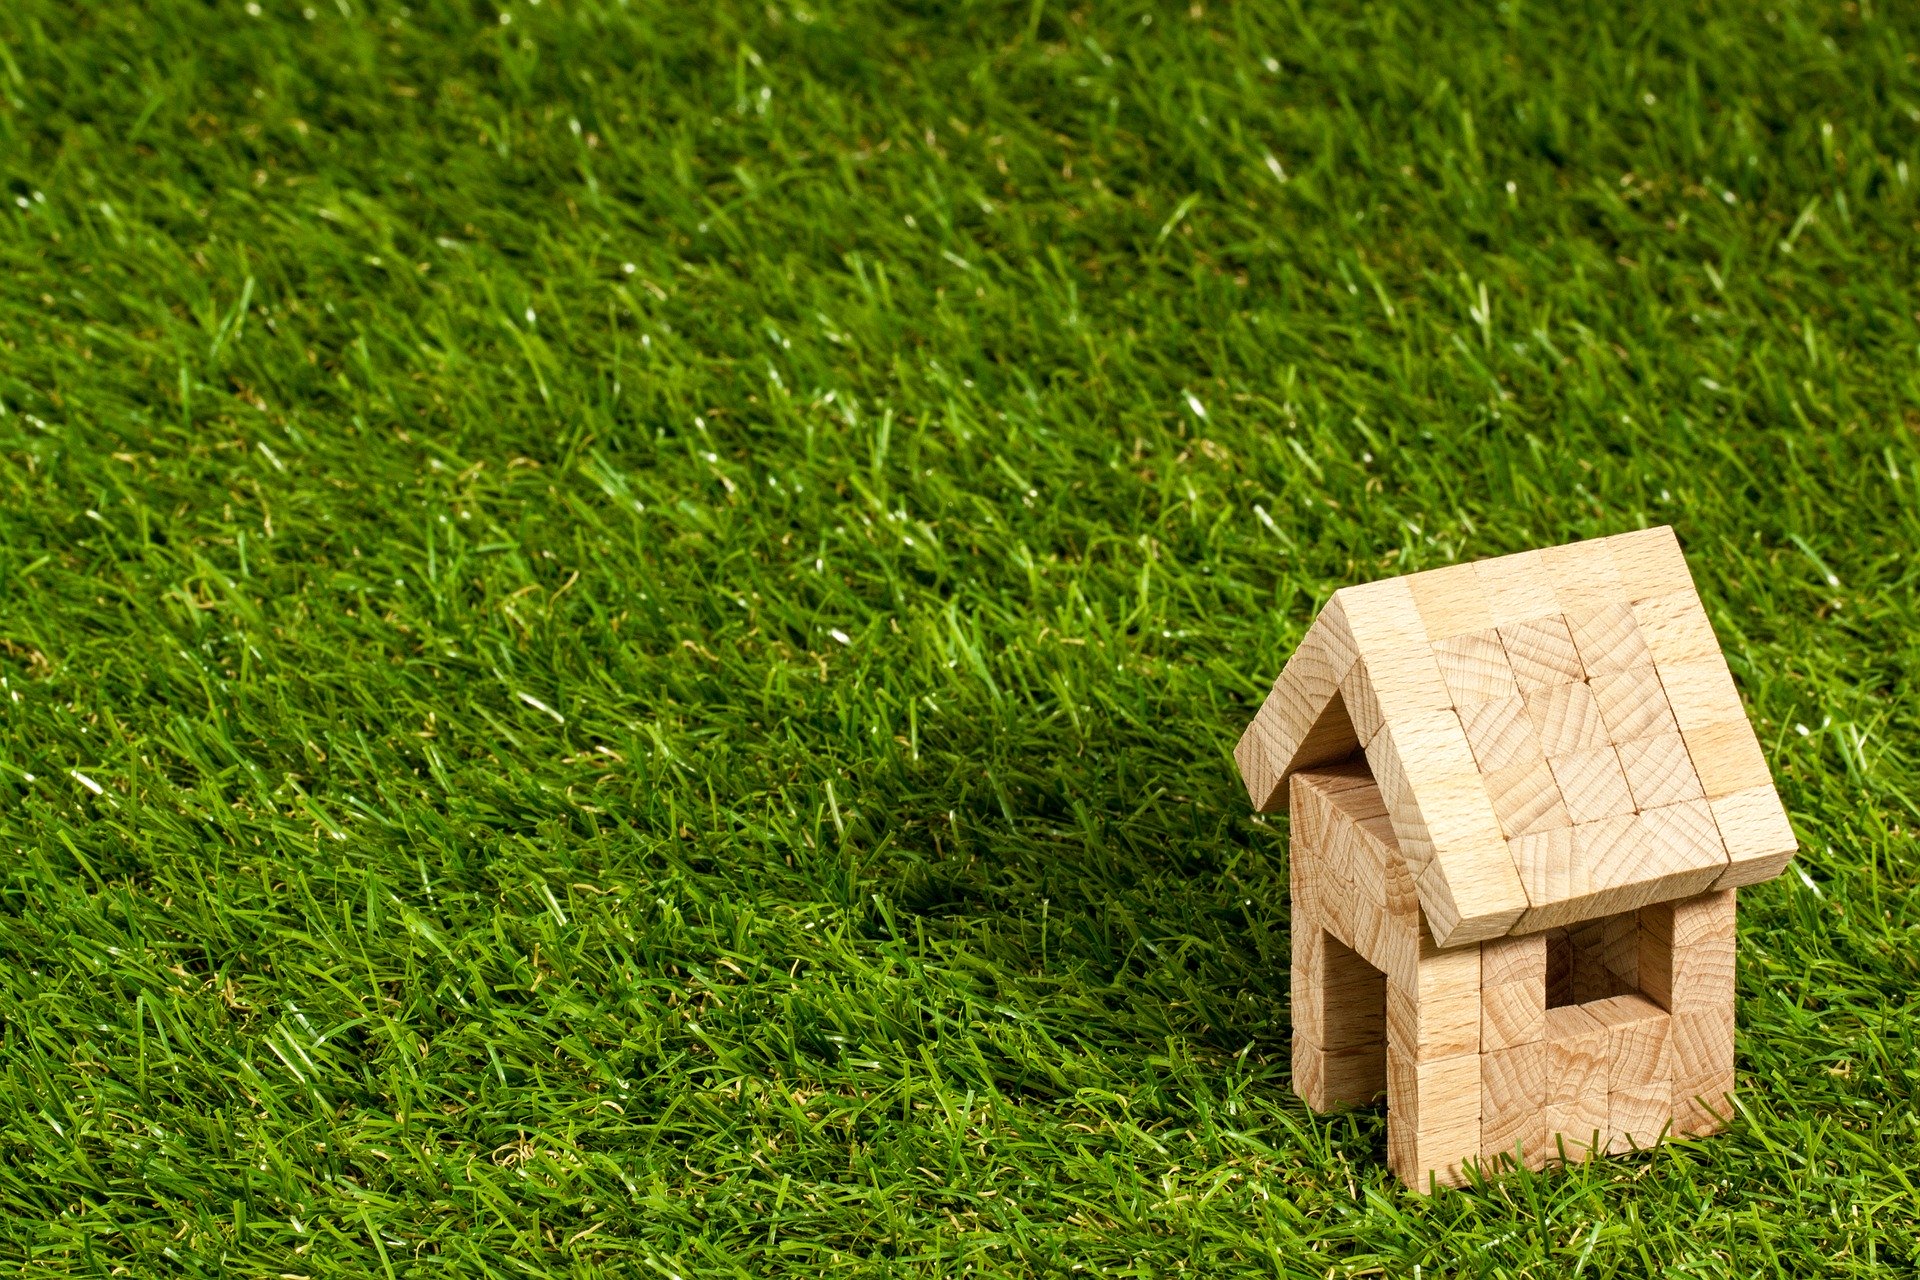 Financial crises in history - Picture of a wooden toy house on grass